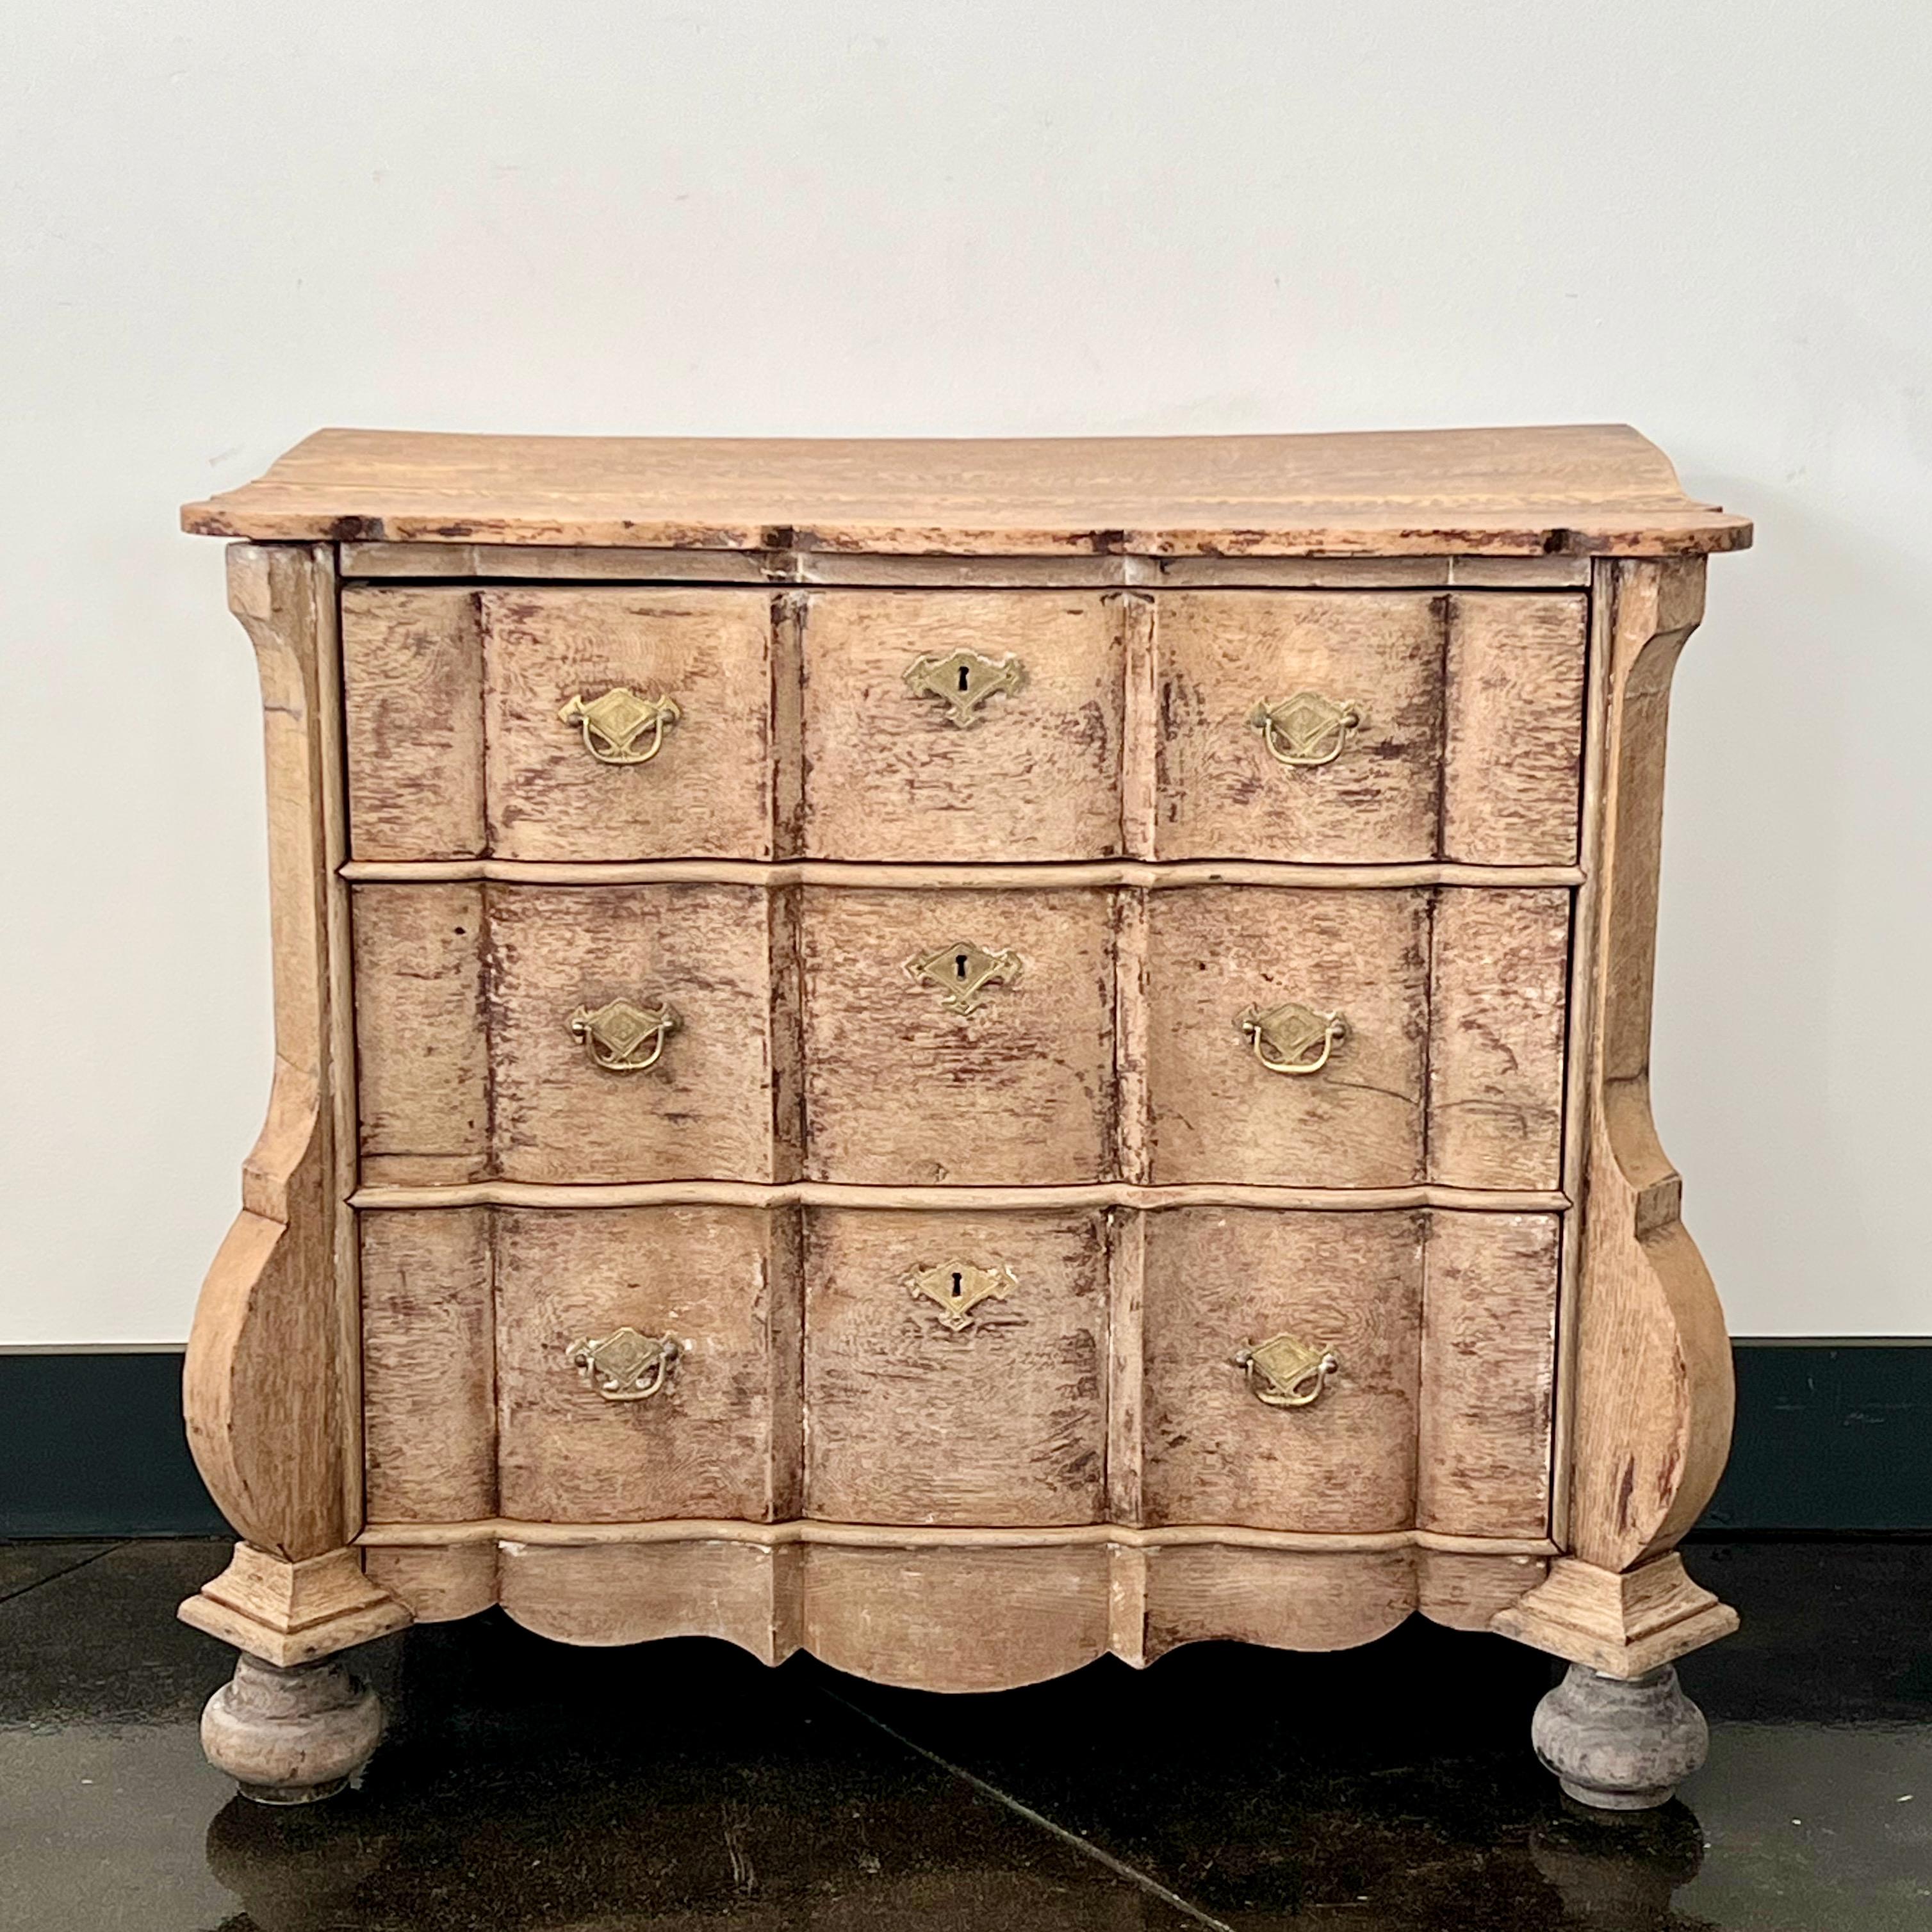 Charming 19th century very carved bombe front Dutch commode in bleached oak.
With original bronze hardwares.
Holland circa 1860.